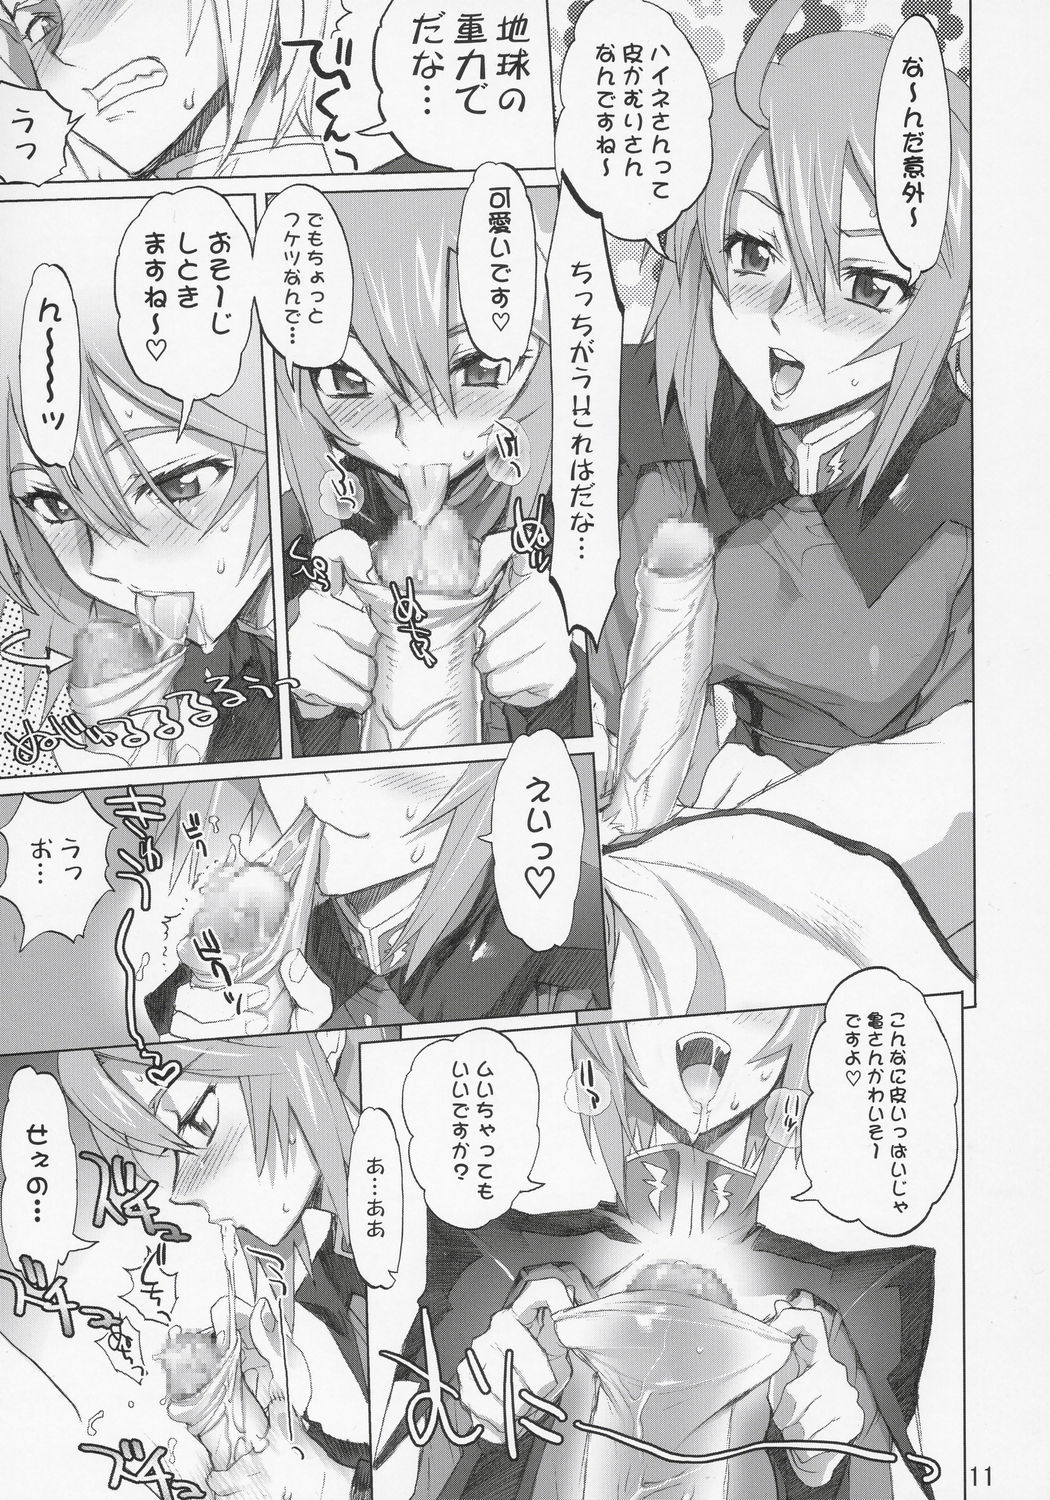 (C69) [Digital Accel Works] Inazuma Warrior 2 (Various) page 10 full